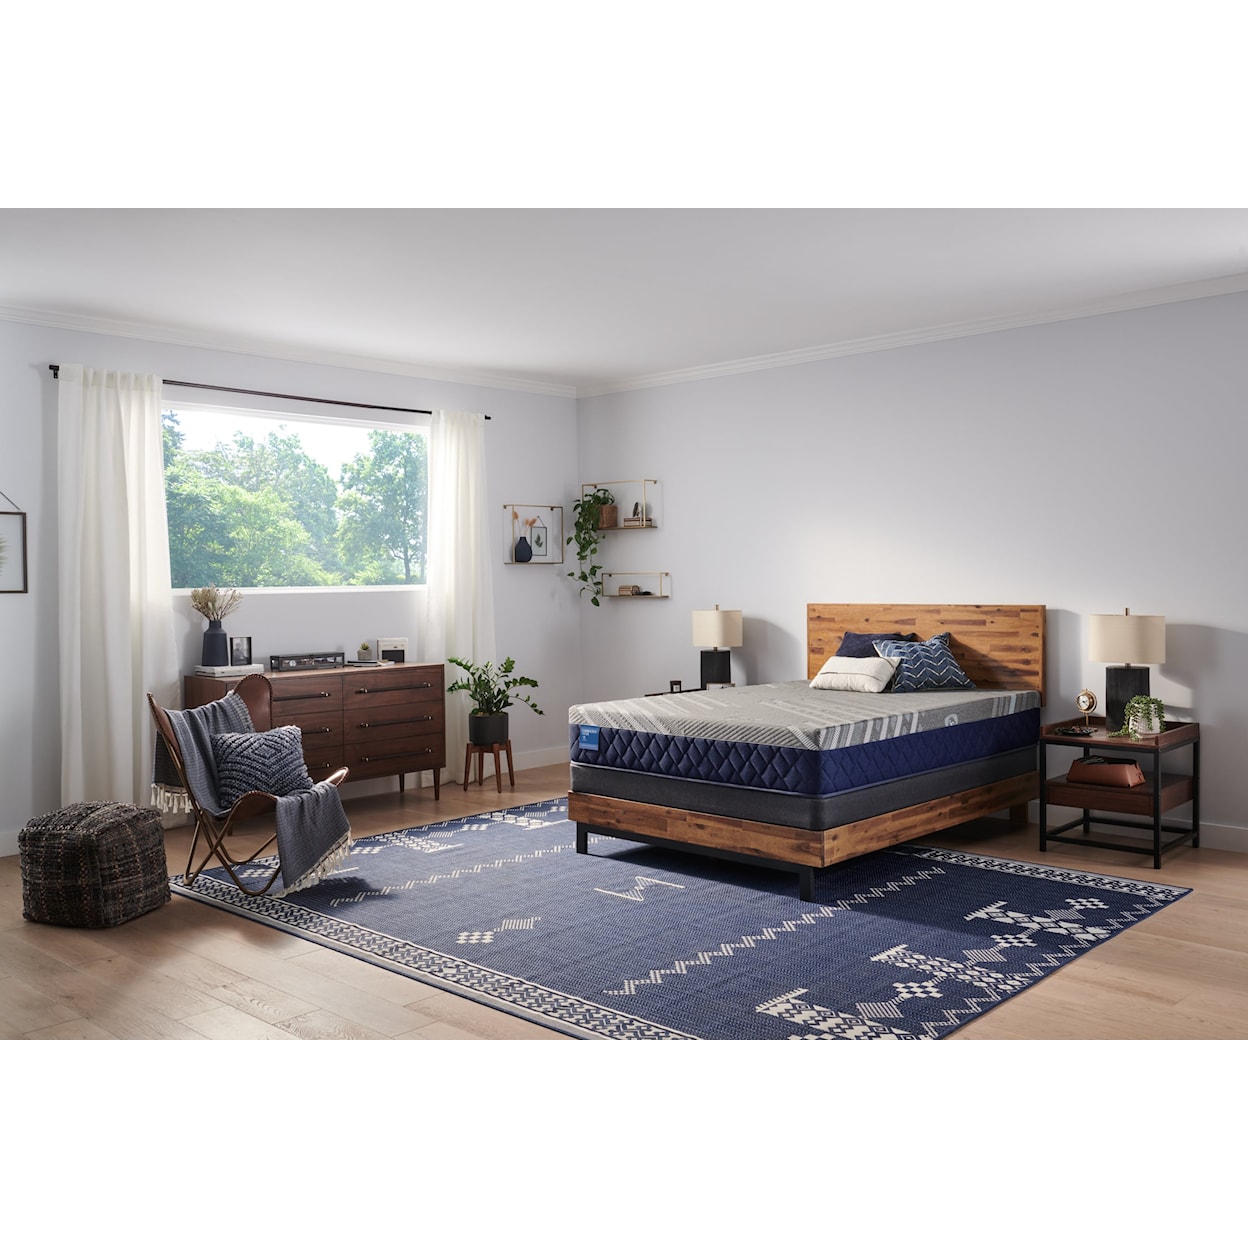 Sealy Carrington Chase H4 Firm Queen Mattress